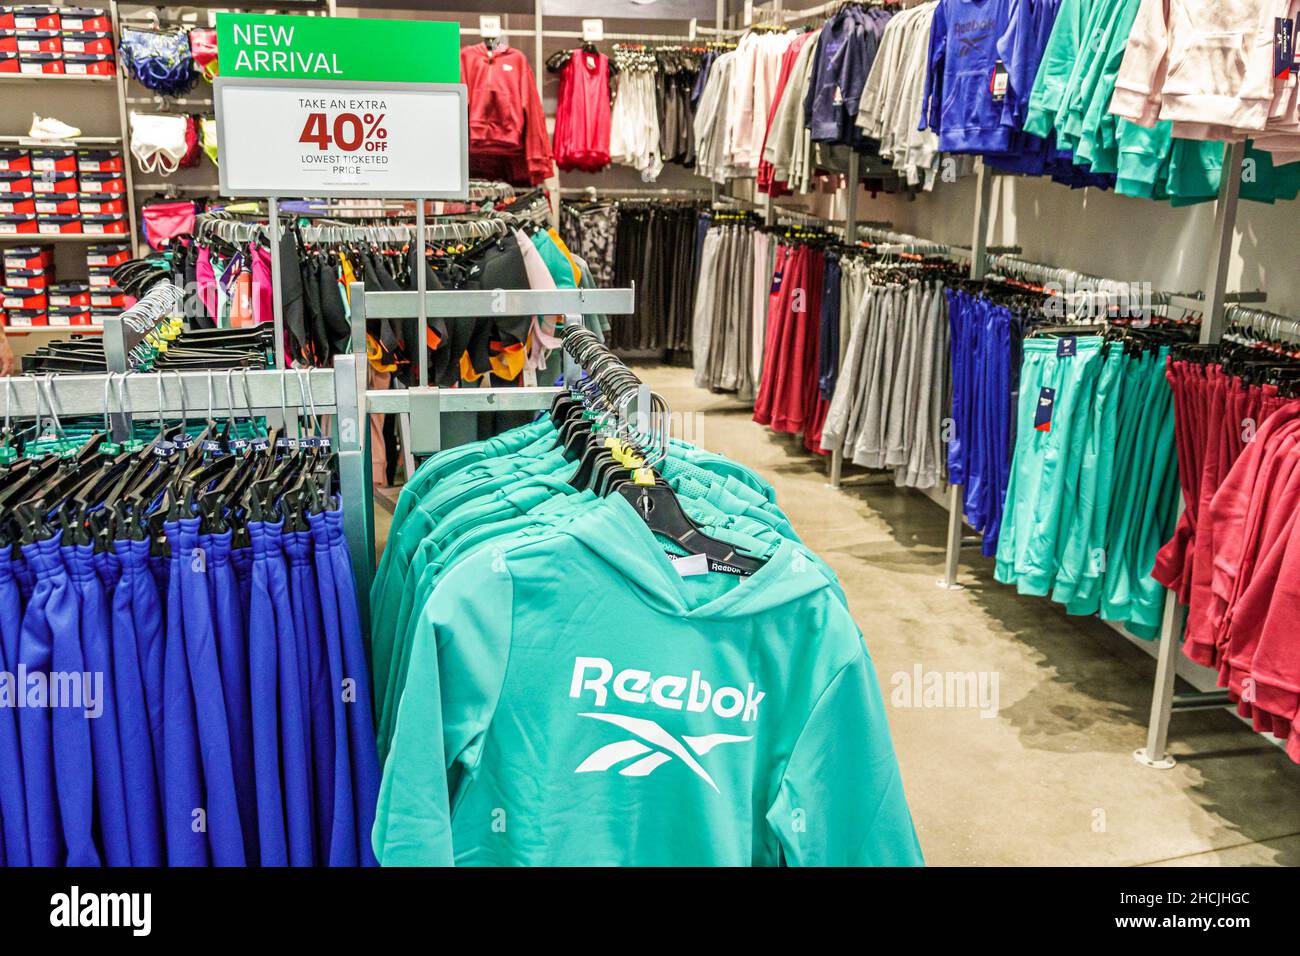 Orlando Florida Orlando Vineland Premium Outlets outlet factory store  fashion mall shopping Reebok athletic shoes clothing apparel display sale  sign 4 Stock Photo - Alamy